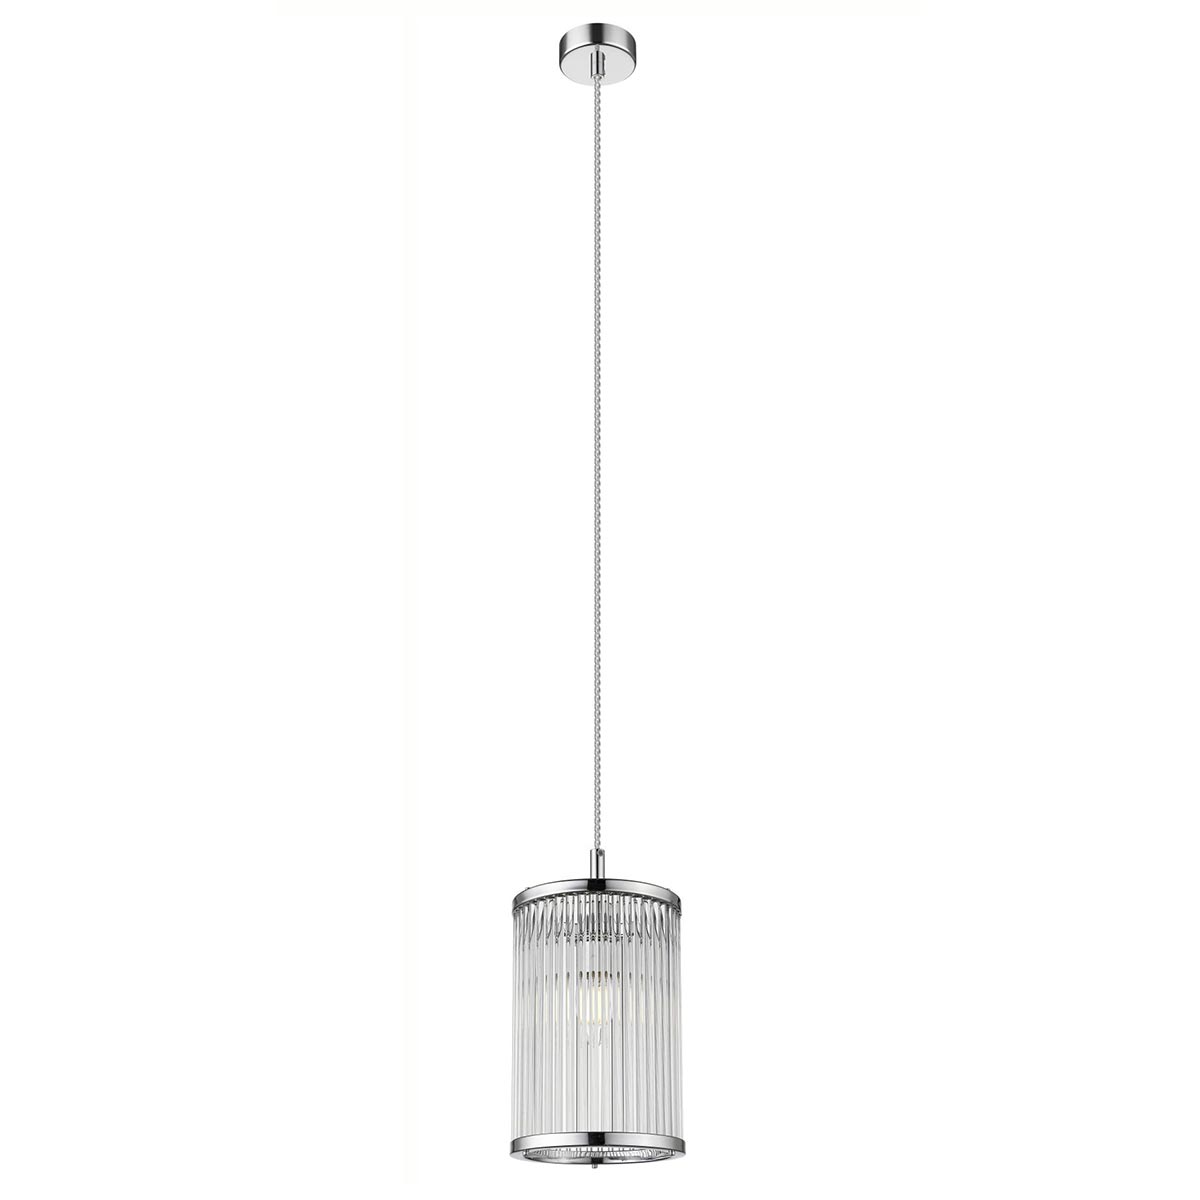 Impex Antigua 1 Light Ceiling Pendant Crystal Rods Polished Chrome